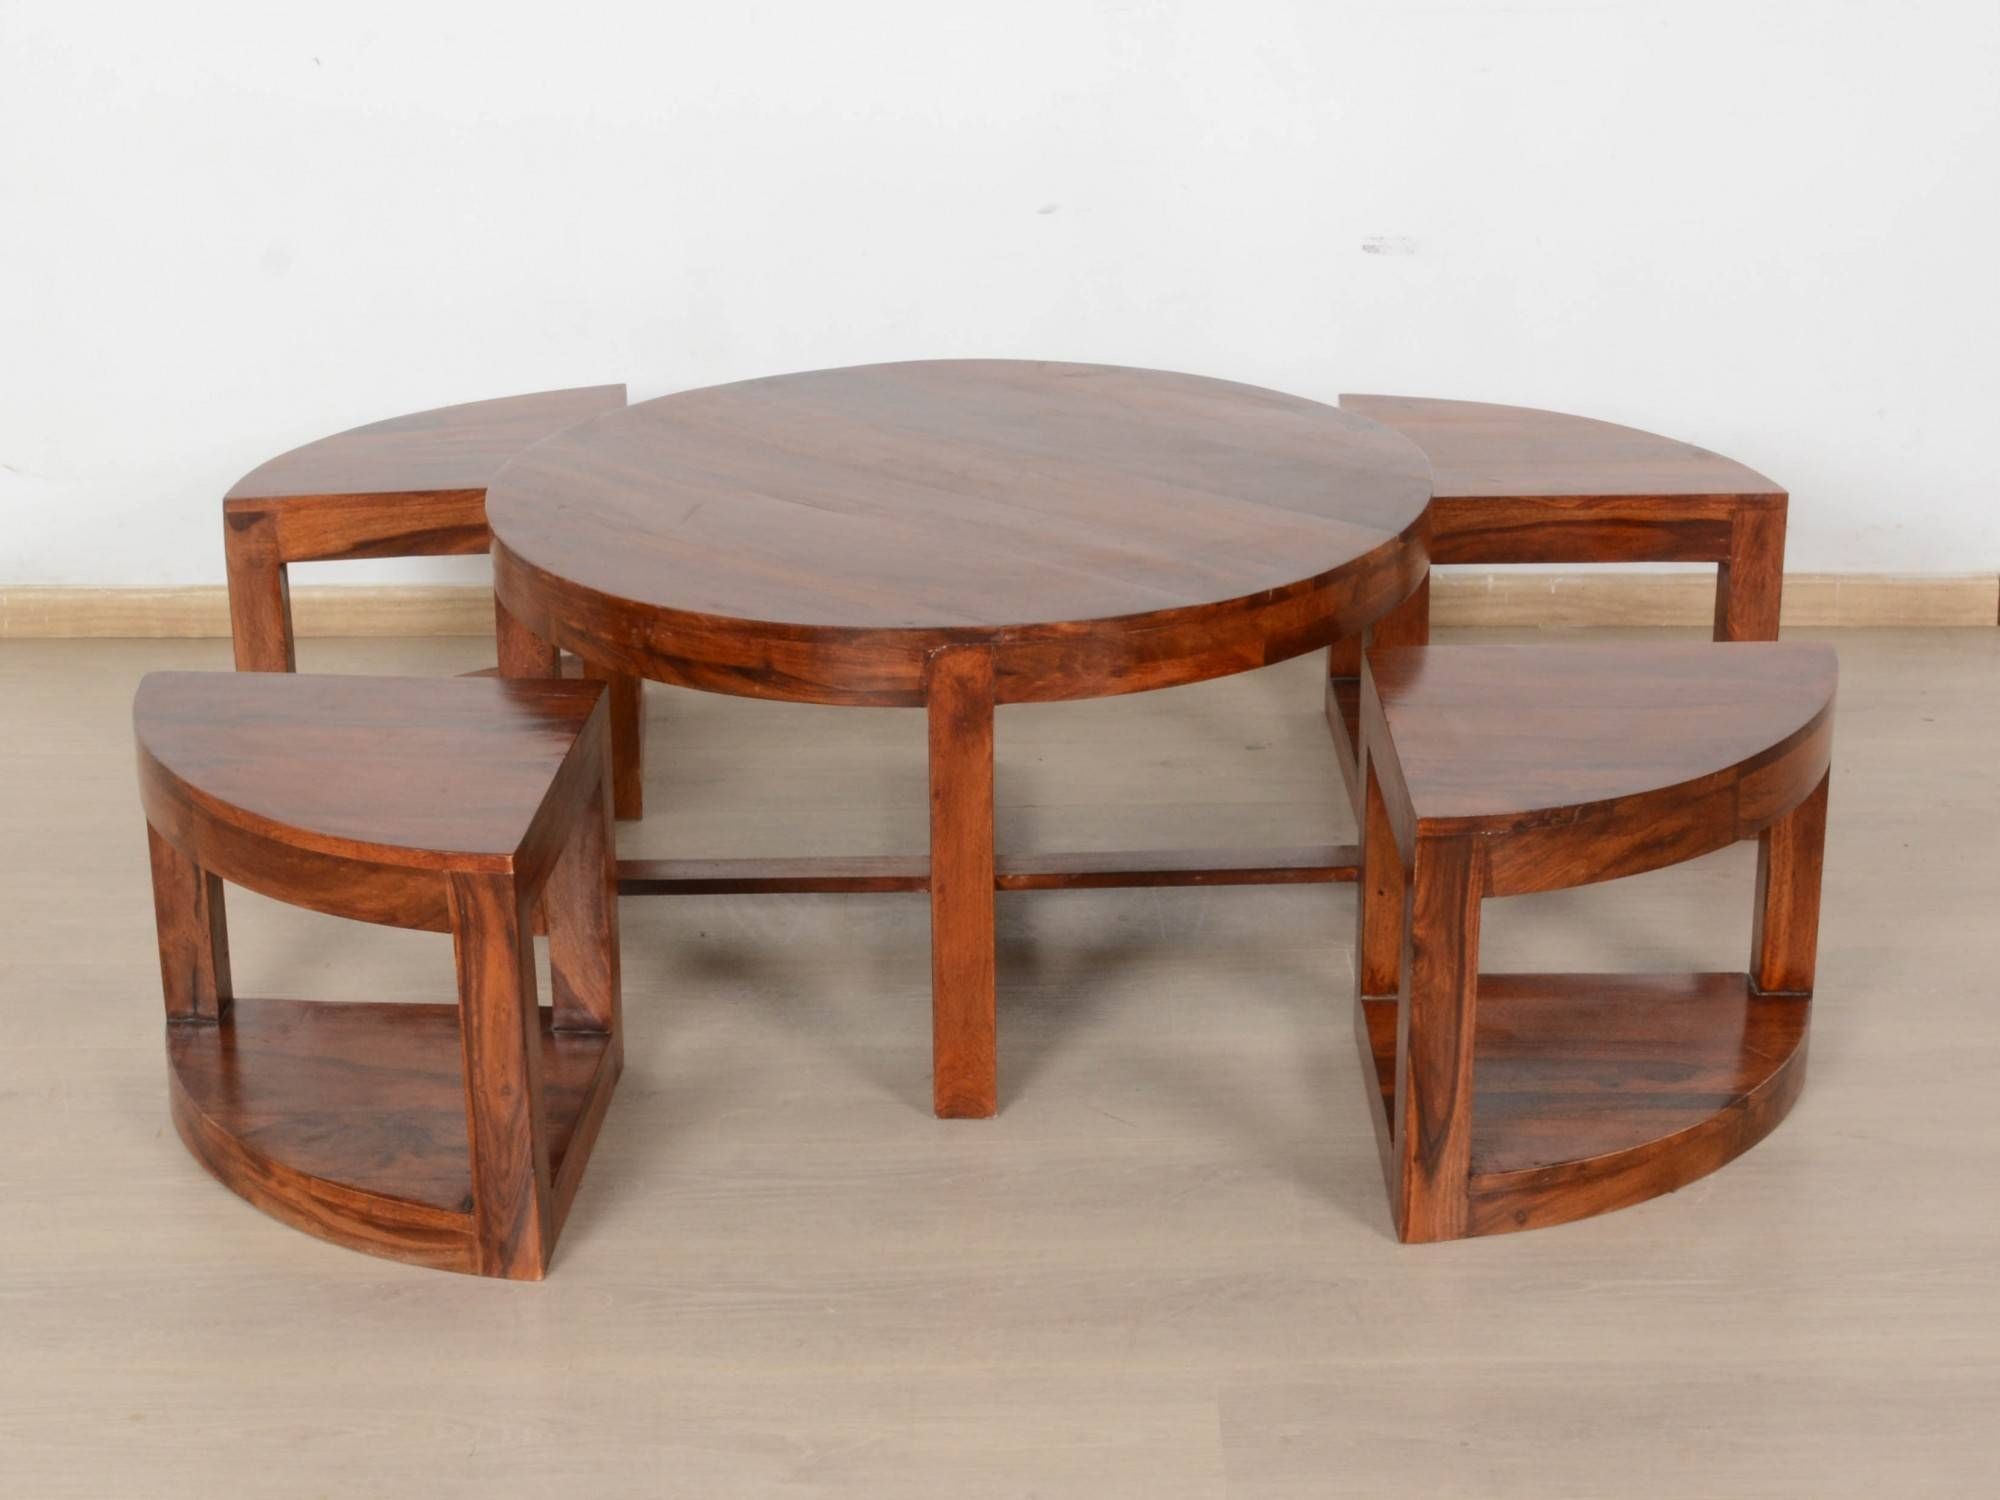 Sally Sheesham Coffee Table: Buy And Sell Used Furniture And For Sheesham Coffee Tables (View 29 of 30)